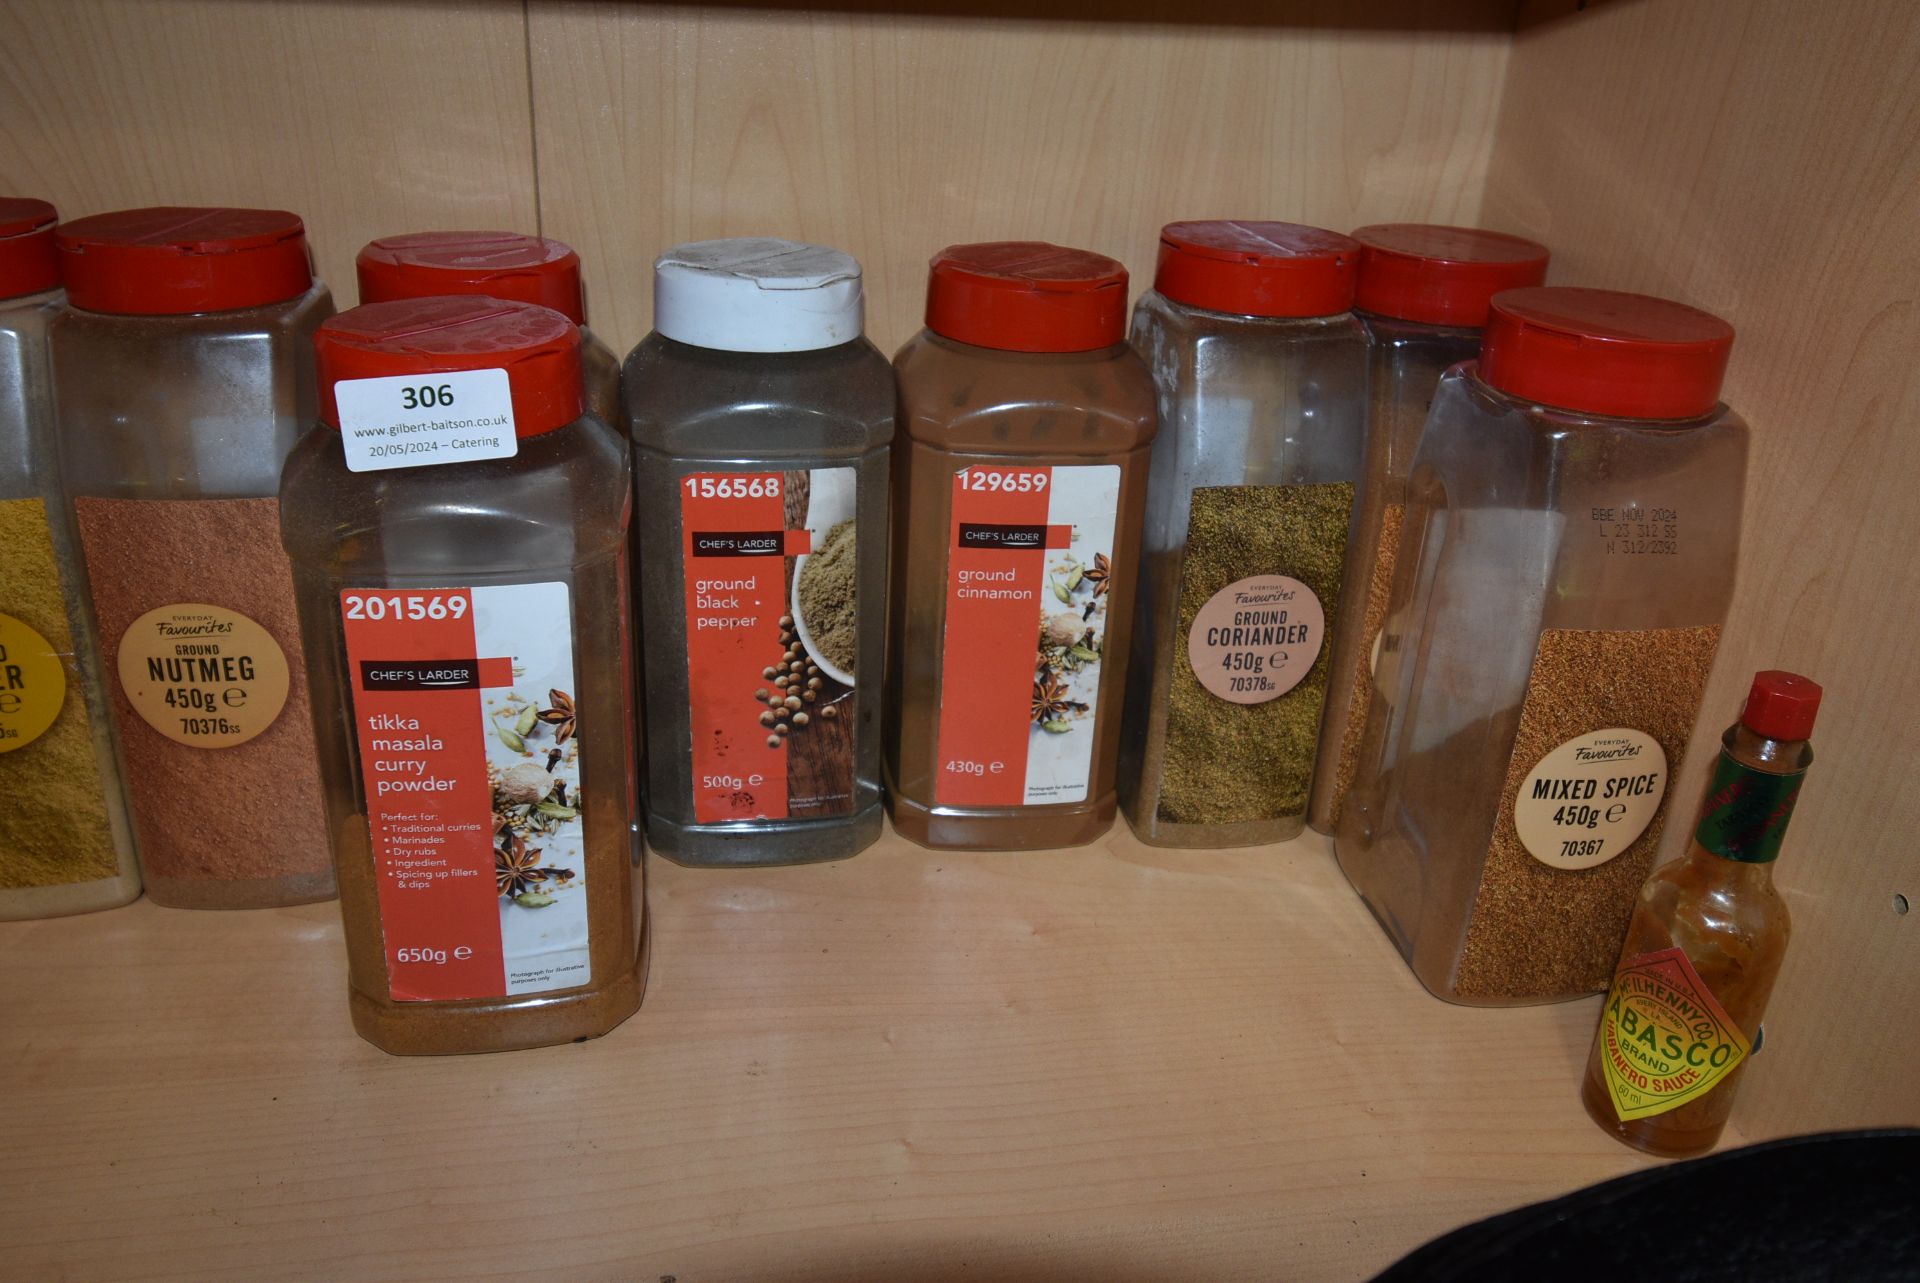 Contents of Shelf to Include Assorted Spices Including Black Pepper, Nutmeg, Ginger, etc. - Bild 3 aus 3